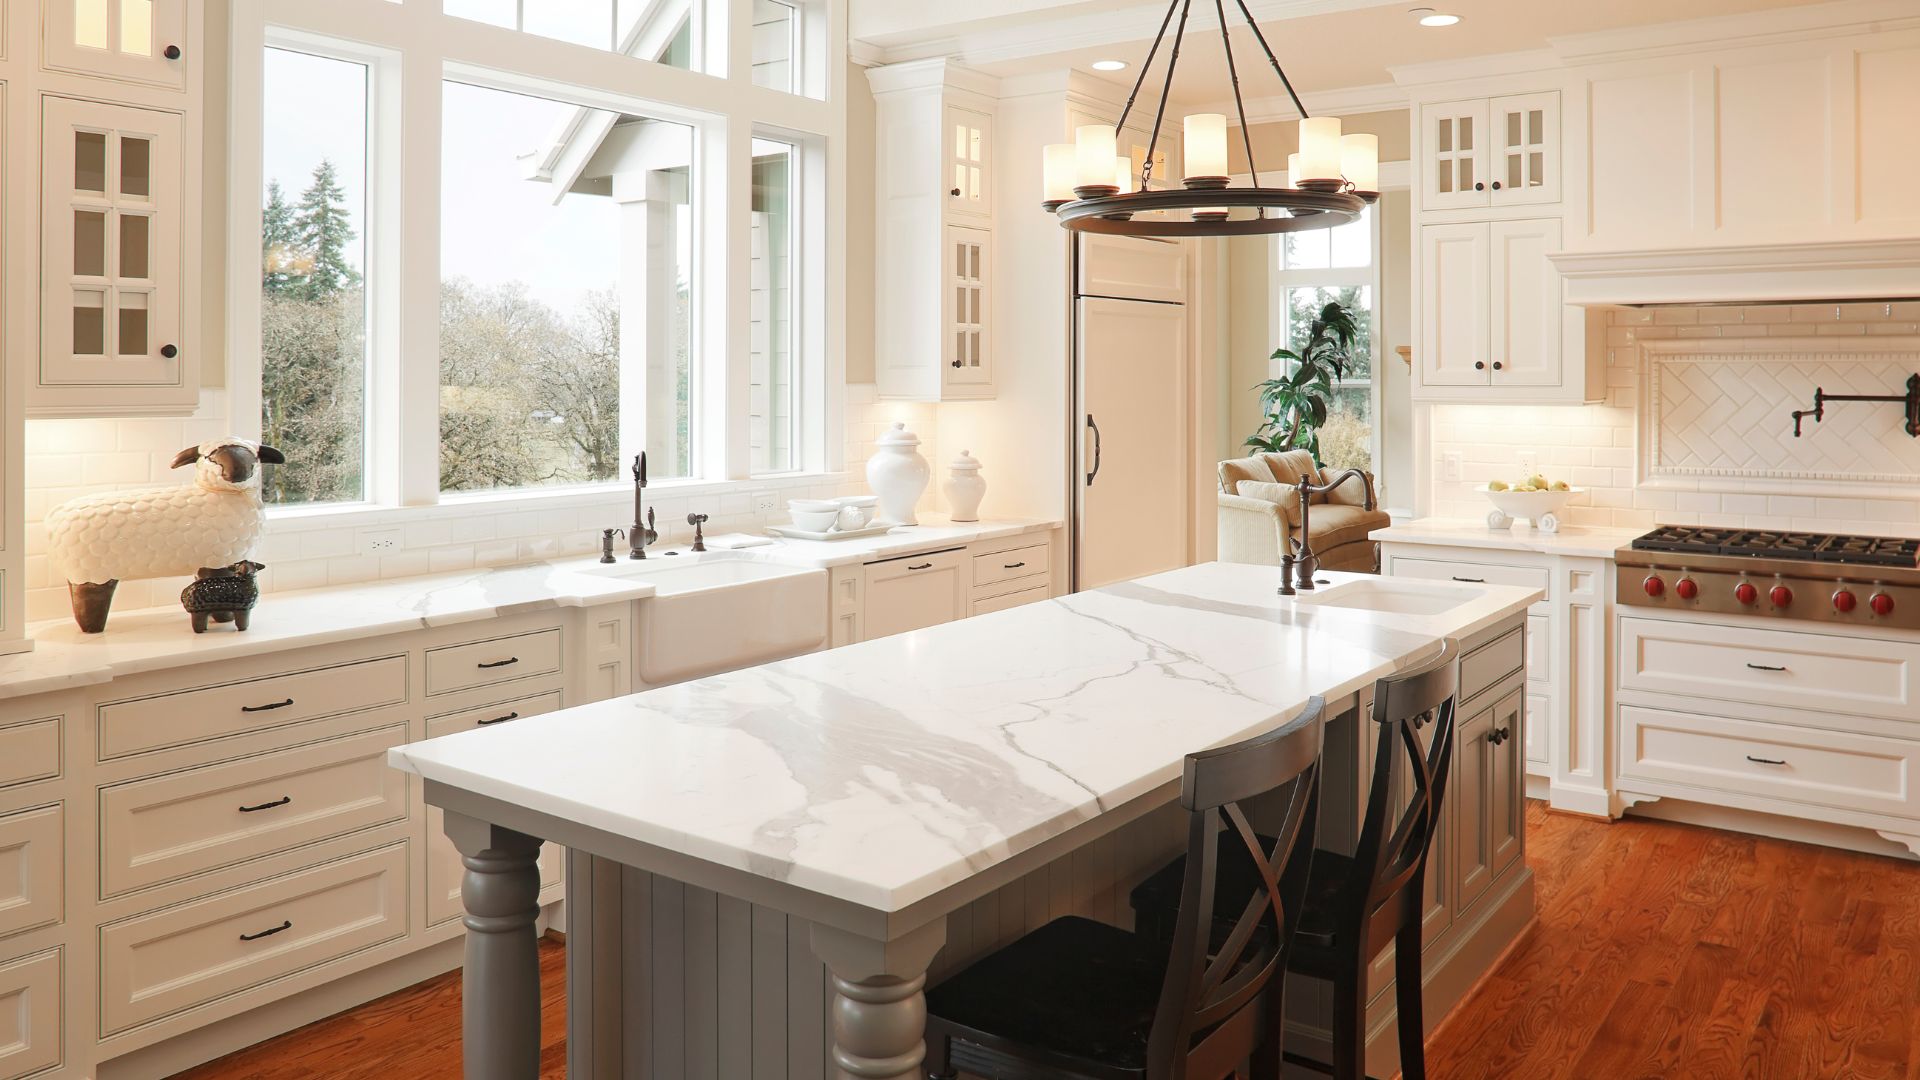 What Kitchen Countertop Color Should You Choose?